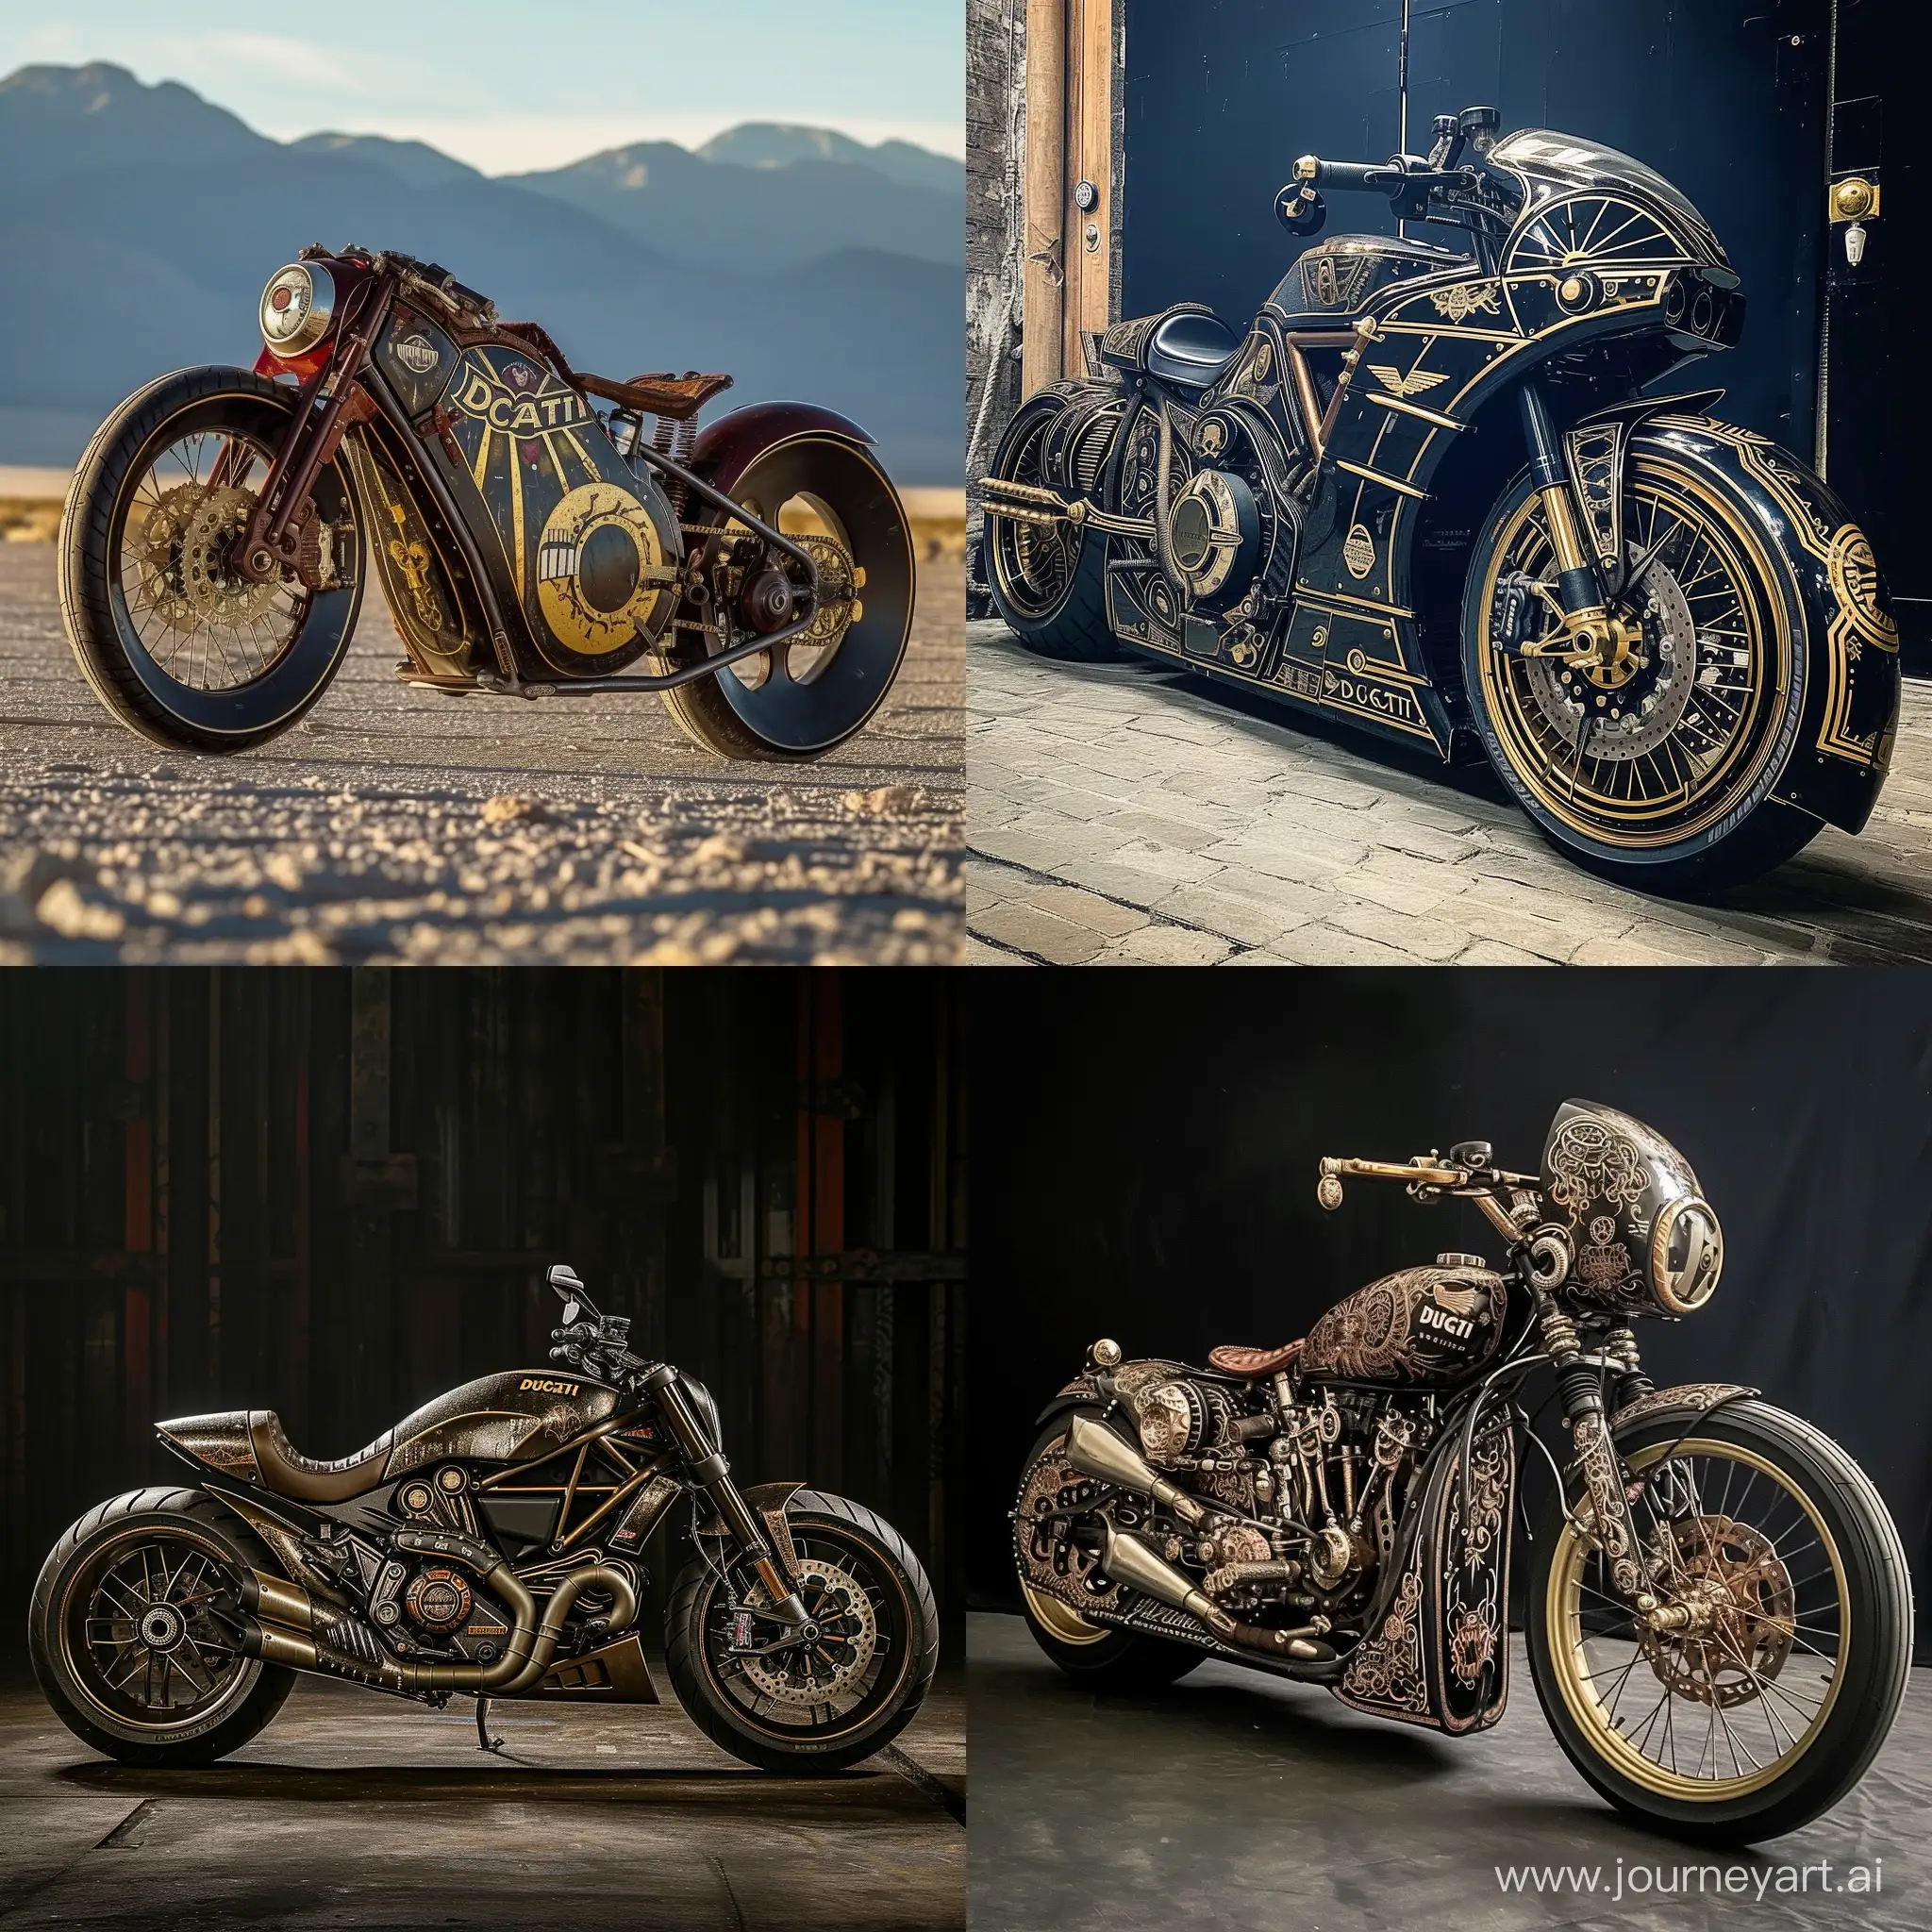 Mad-Max-Inspired-Ducati-Motorcycle-with-Vintage-Circus-Elements-in-Art-Deco-Style